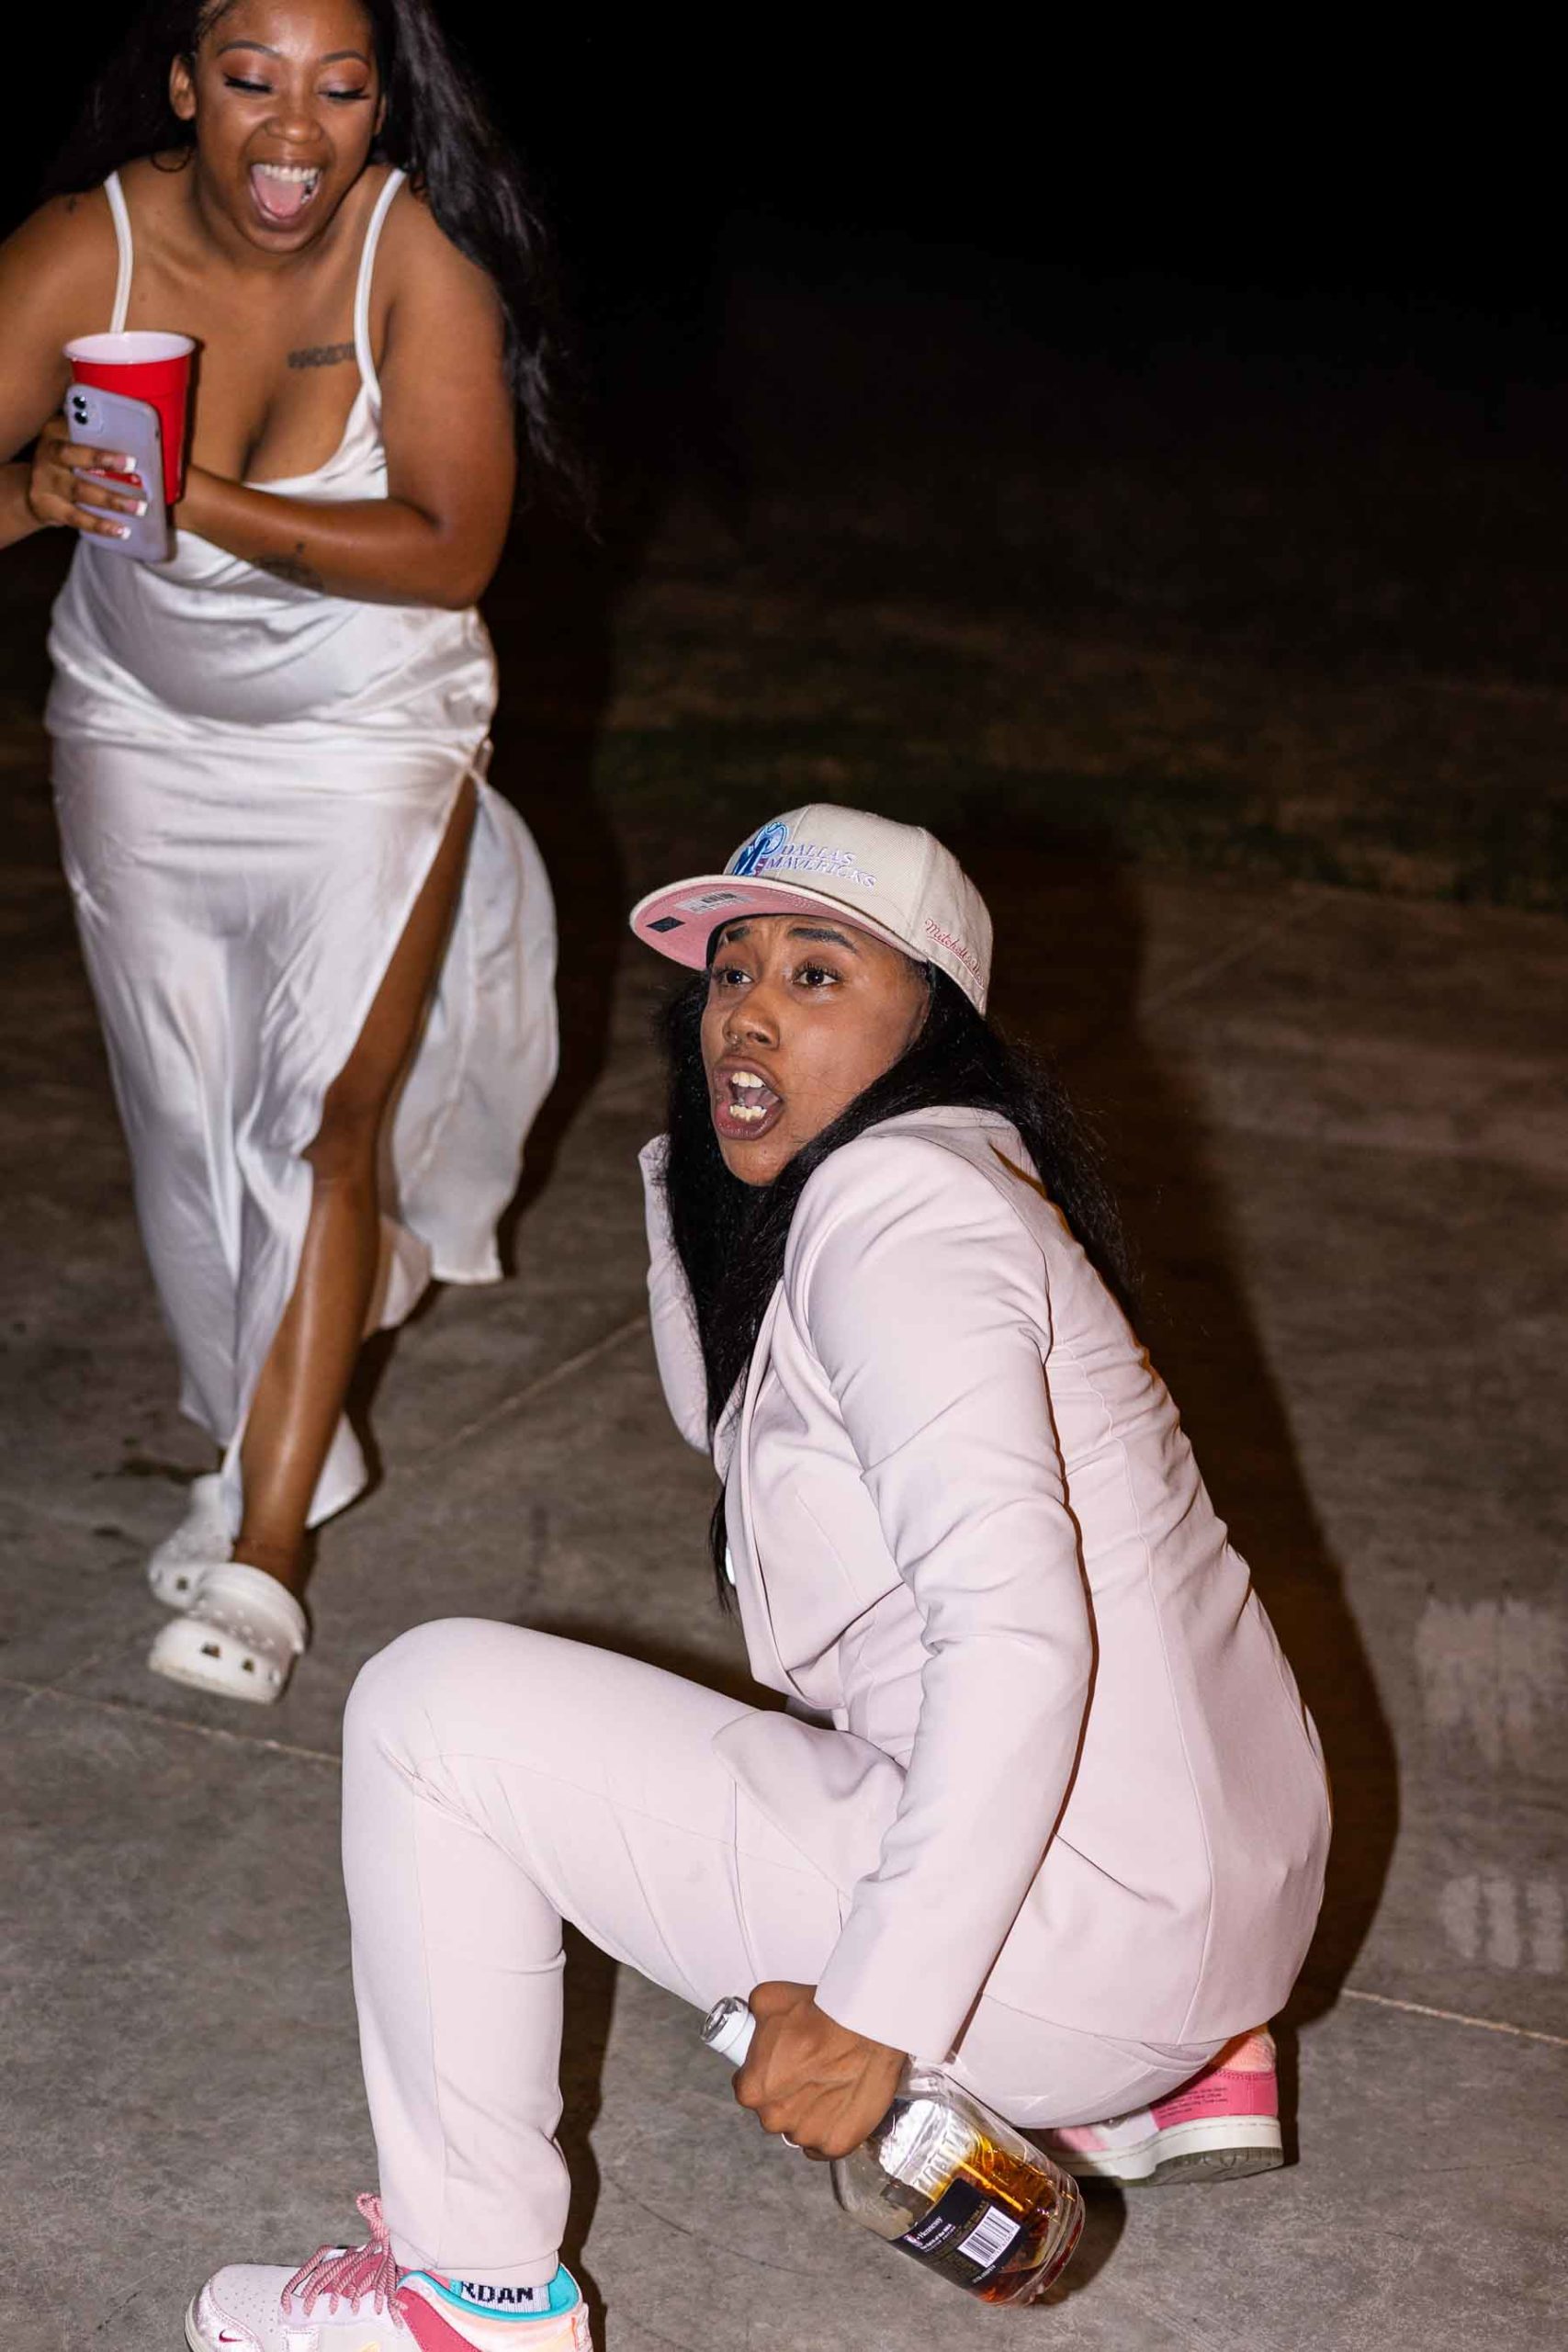 Black lesbian couple dancing, one is in a hat and a pink suit and the other is wearing a silk white dress with thin straps